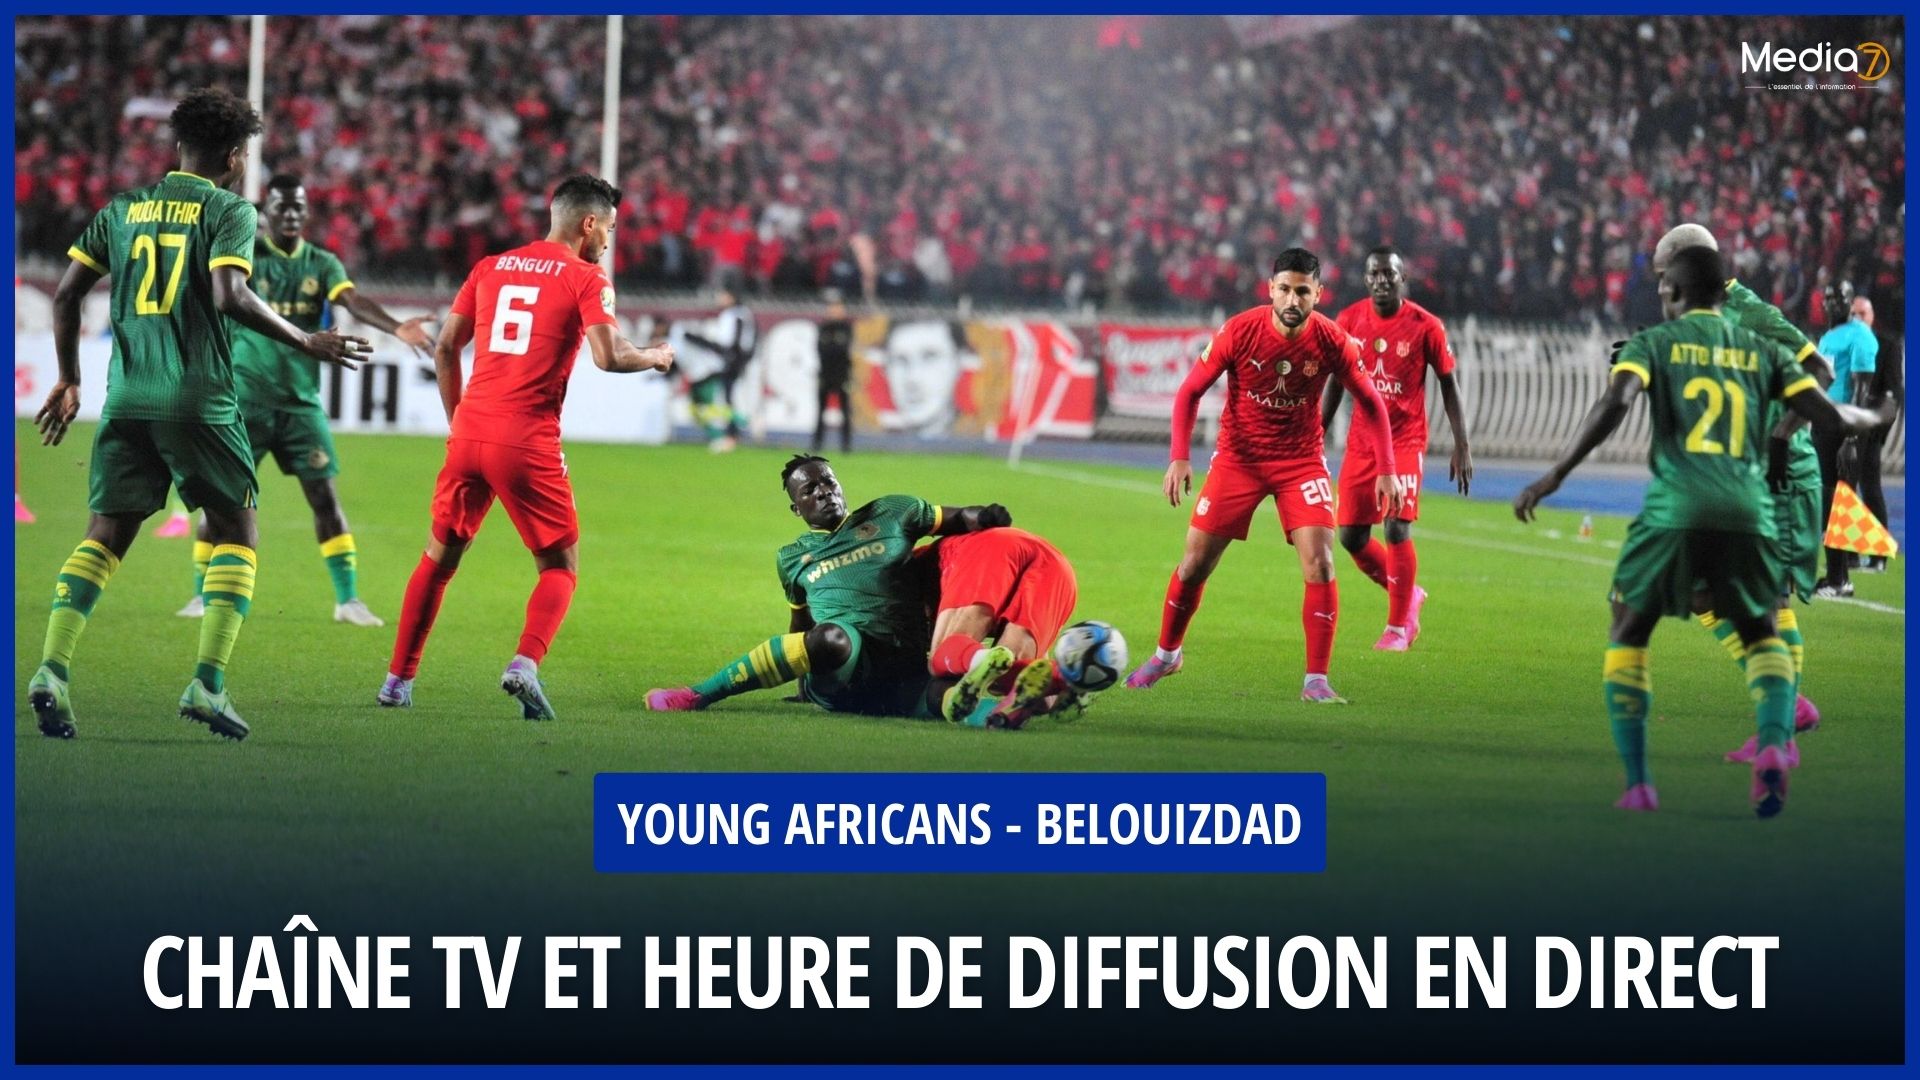 Follow the Young Africans - Belouizdad Match Live: TV Channel and Broadcast Time - Media7